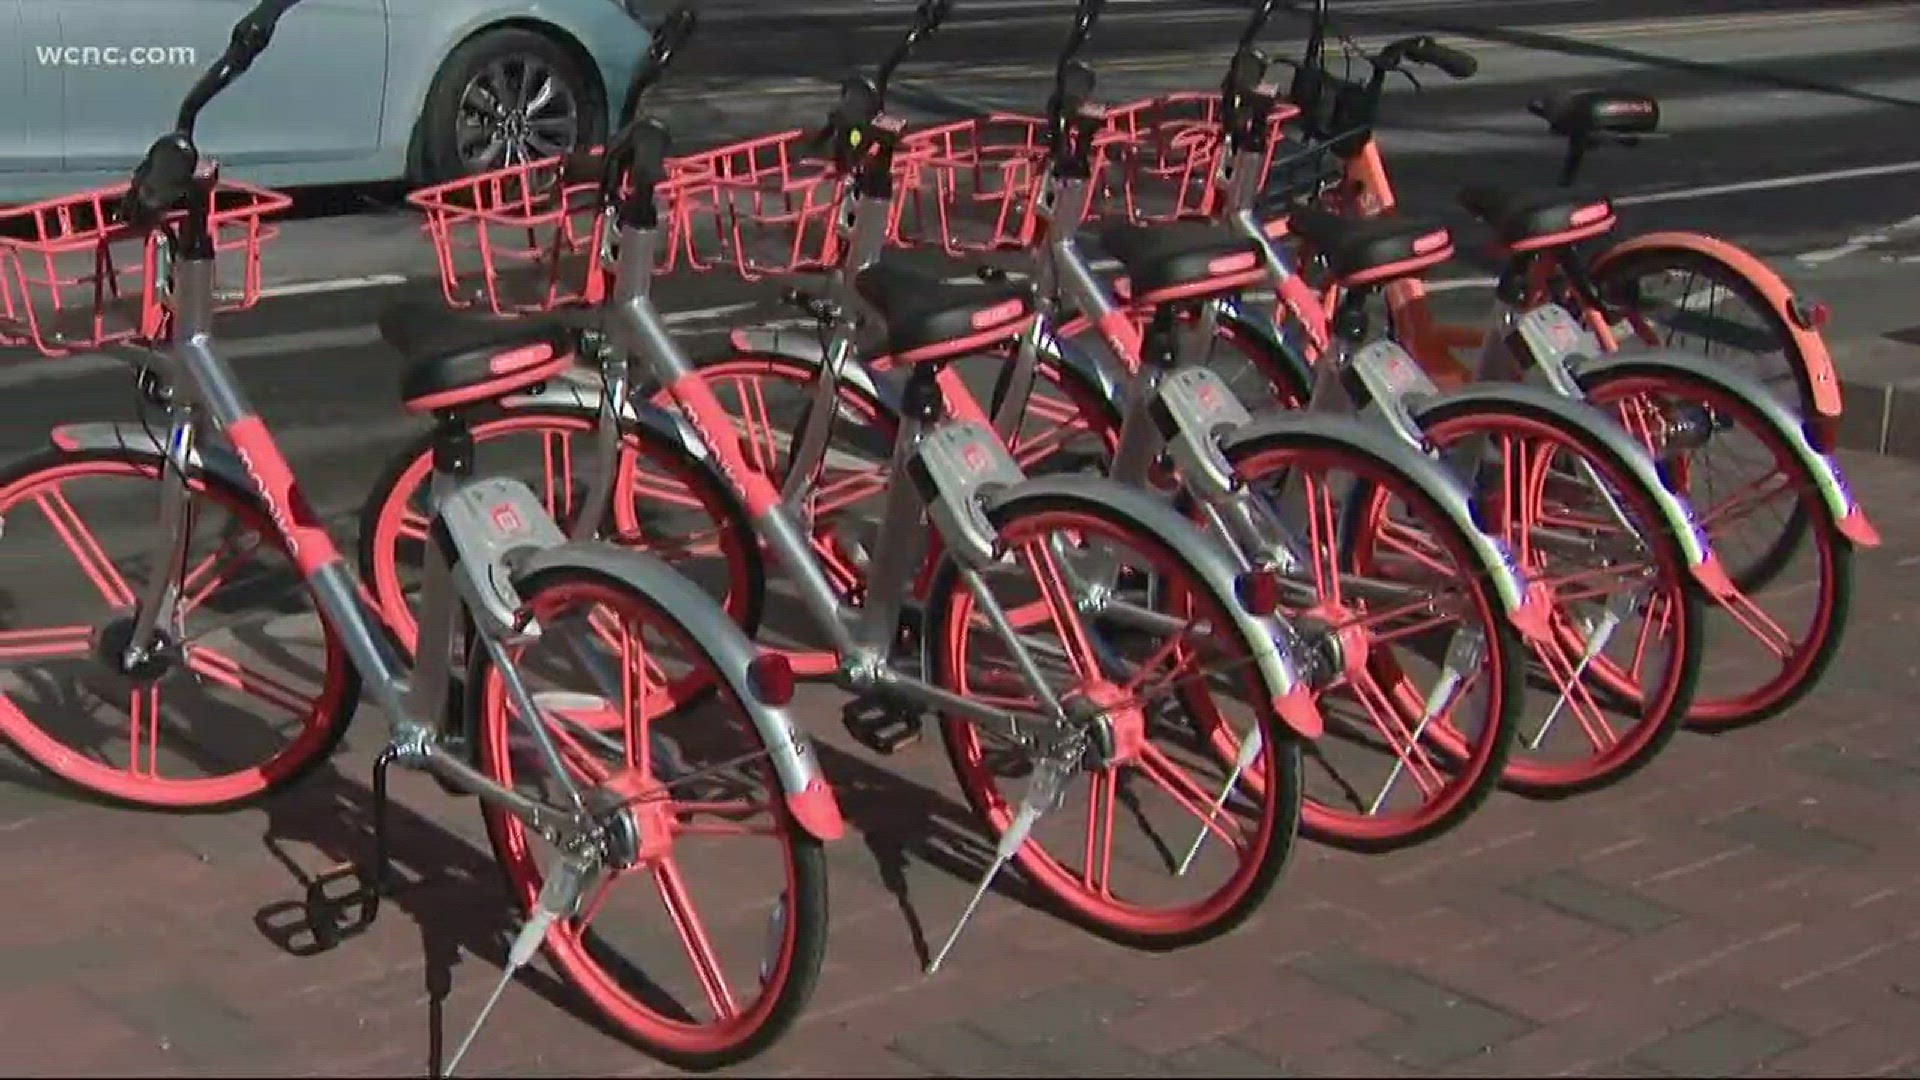 Many residents in Charlotte are sounding off about the hundreds of bicycles that are now dotting the streets of the Queen City. The new bike share pilot program sent 2,000 bikes into the city nearly overnight.